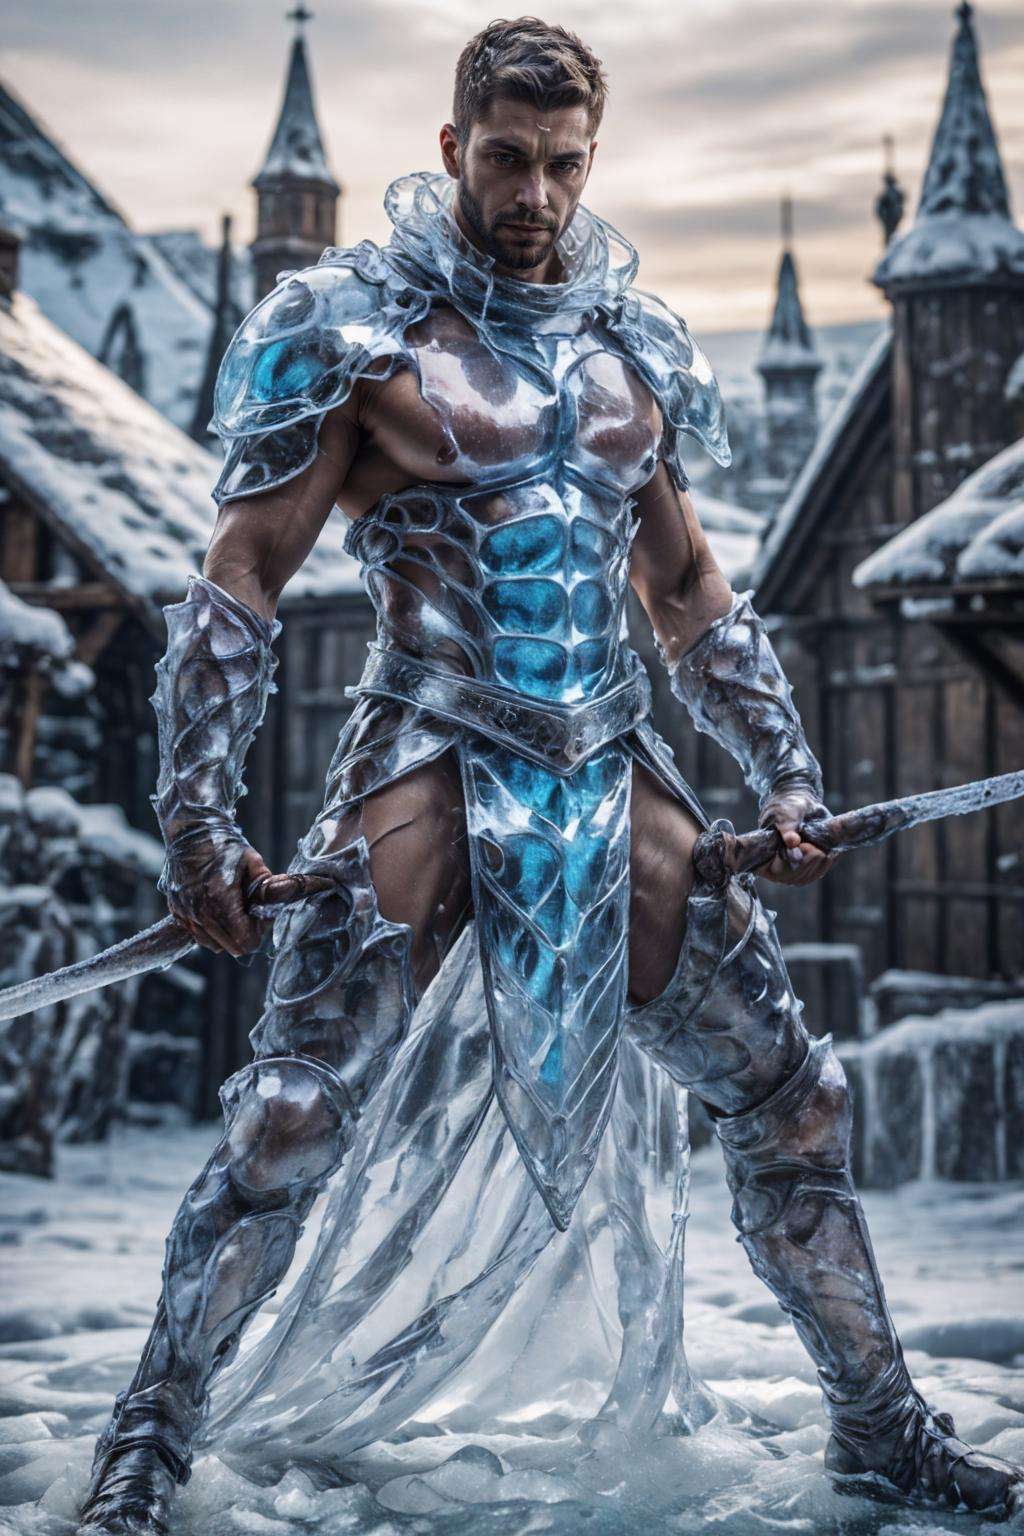 ic34rmor, wearing ice knight armor, dynamic pose, fighting stance, holding ice sword, medieval fantasy city background, full armor, realistic, masterpiece, intricate details, detailed background, depth of field, photo of a man,